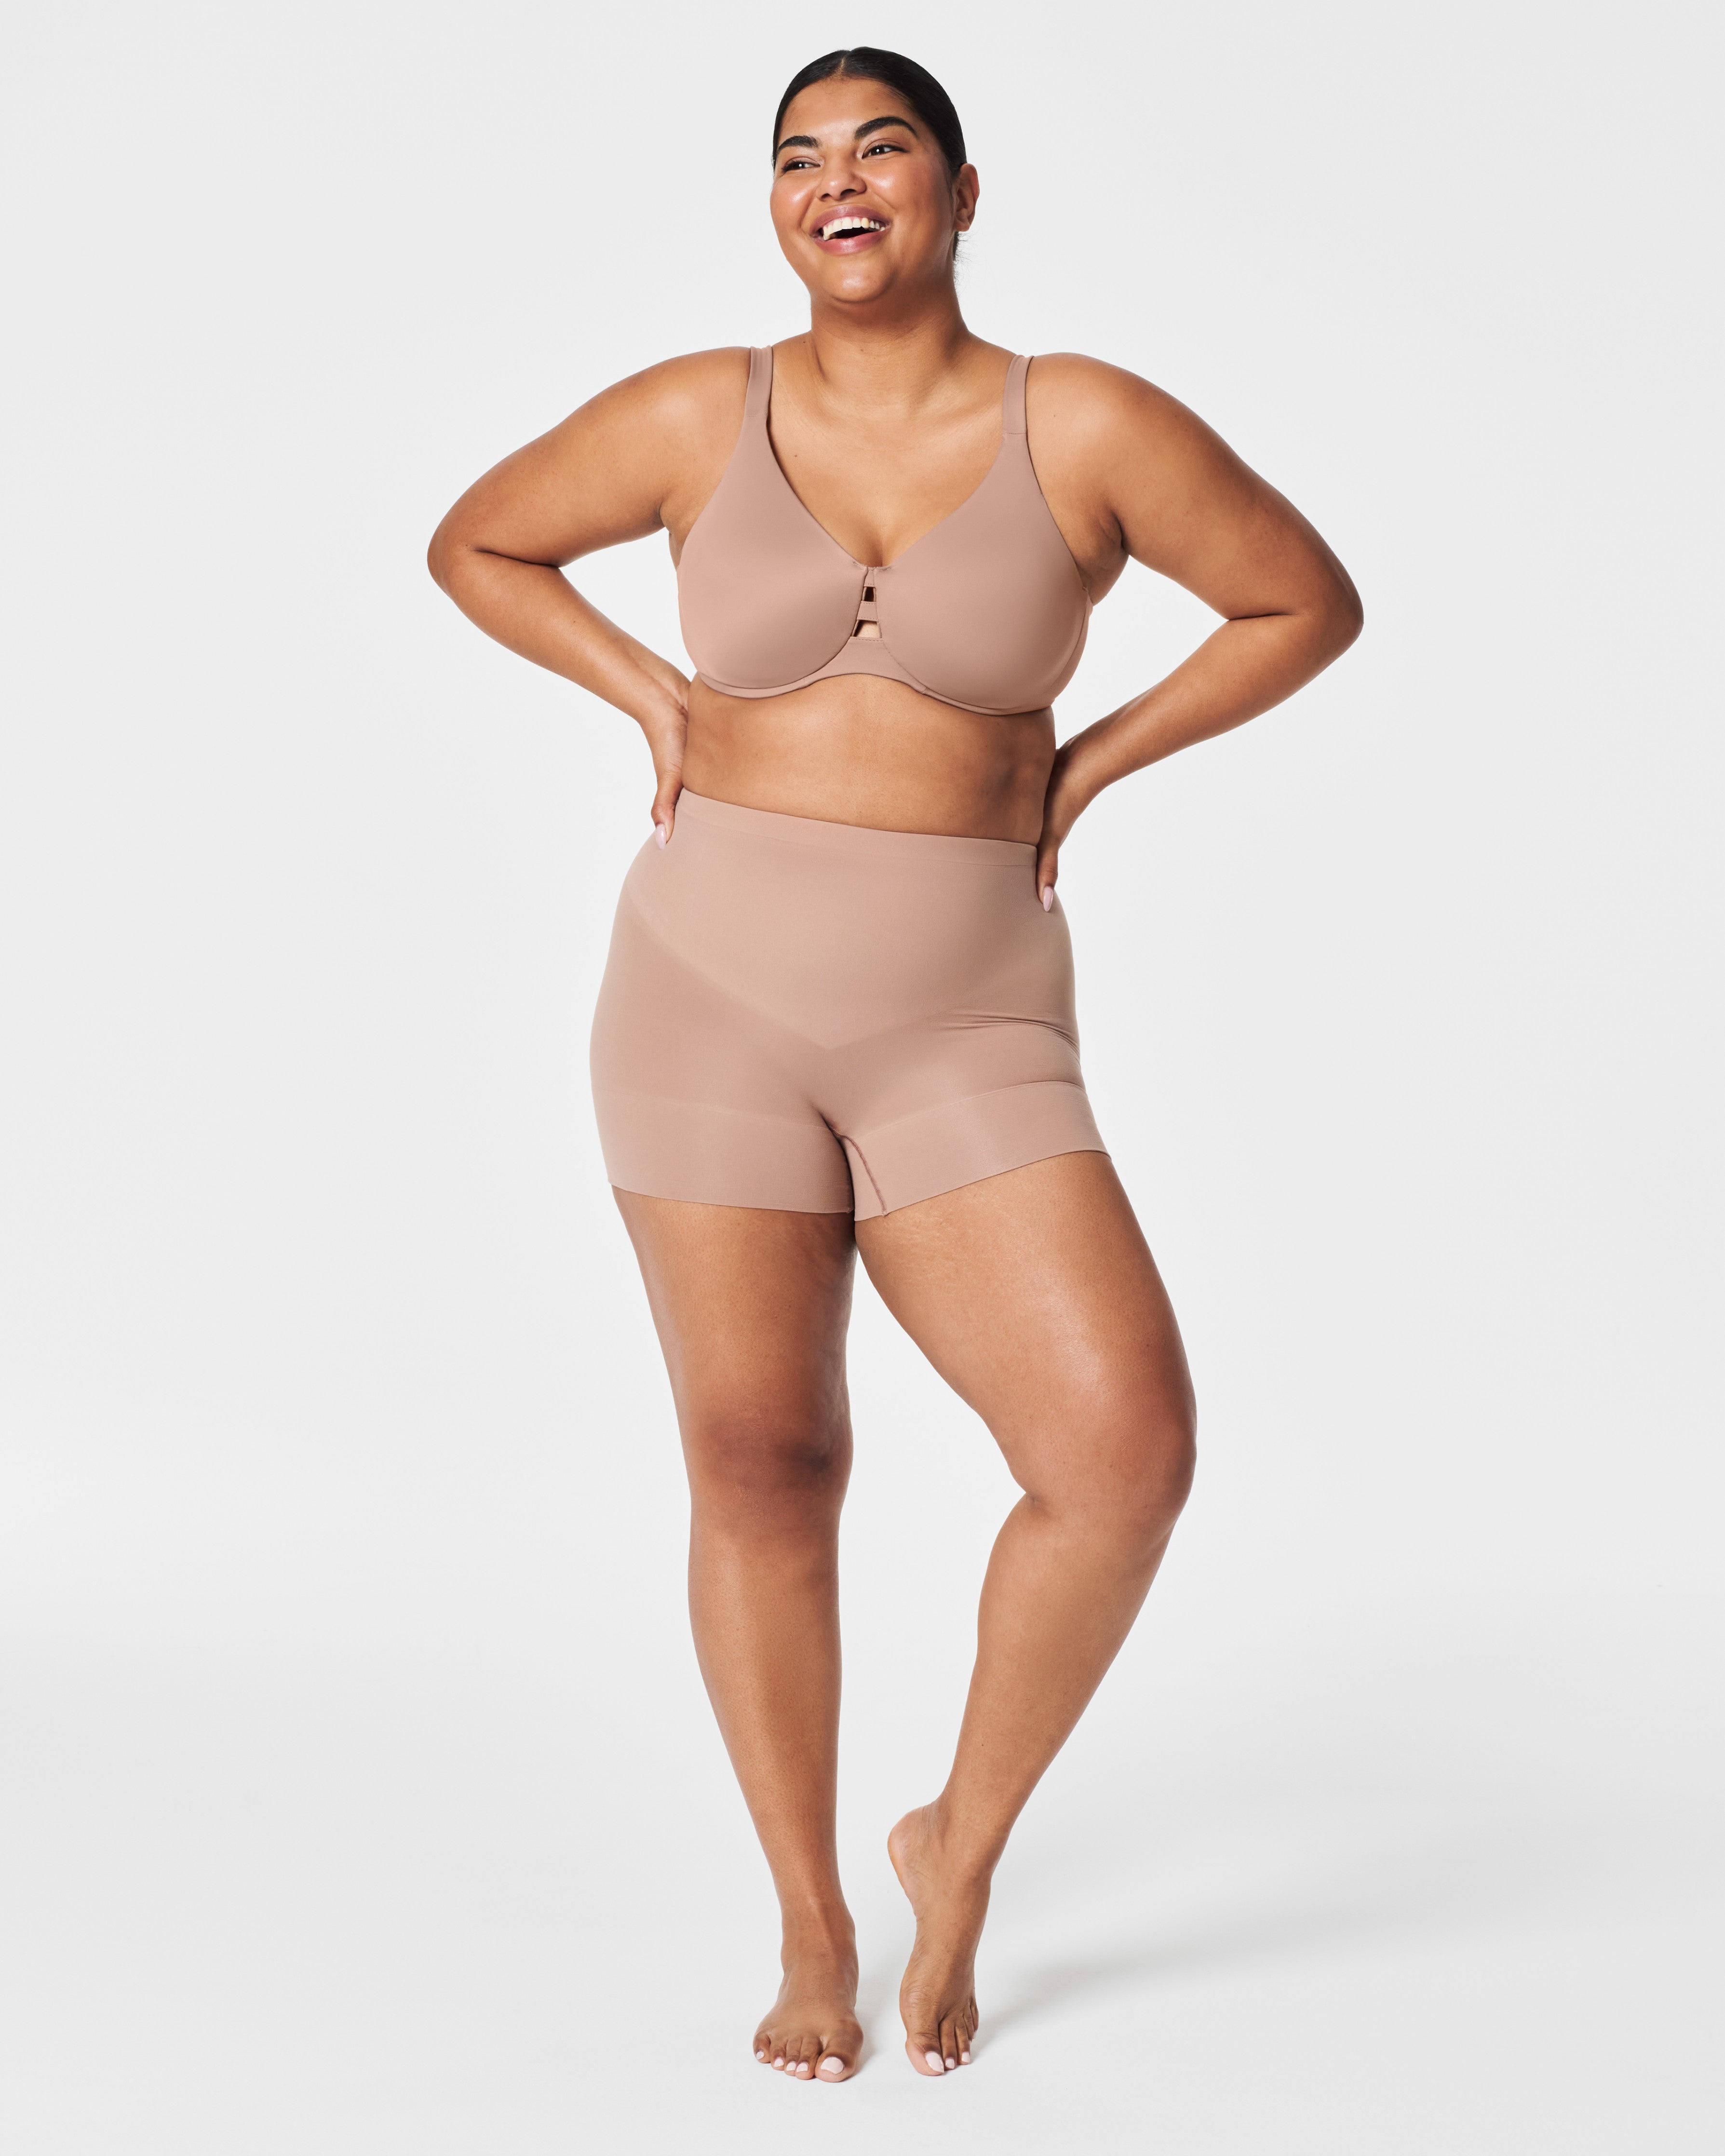 Spanx Just Released Opaque Shorts and I'm Obsessed - PureWow